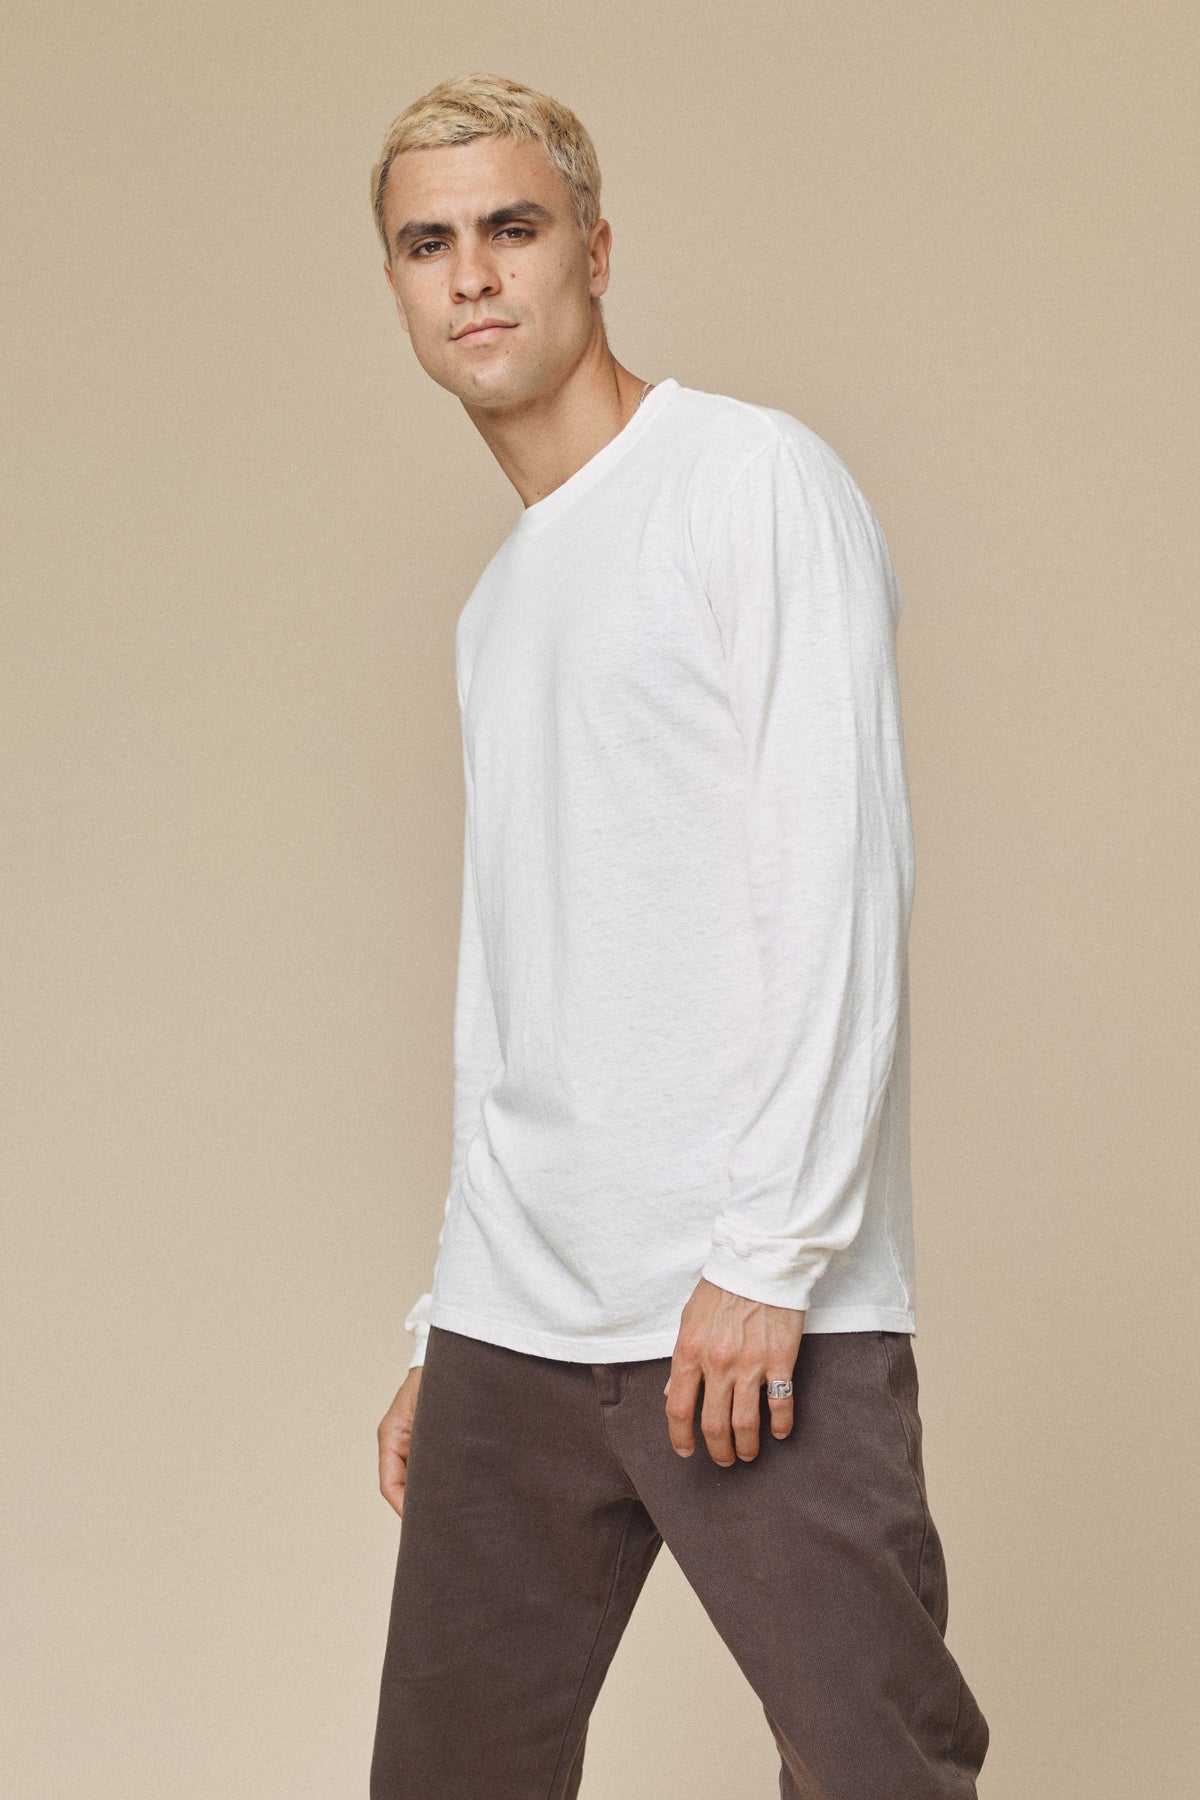 Best T-shirts for men 2023: white tees to long-sleeves